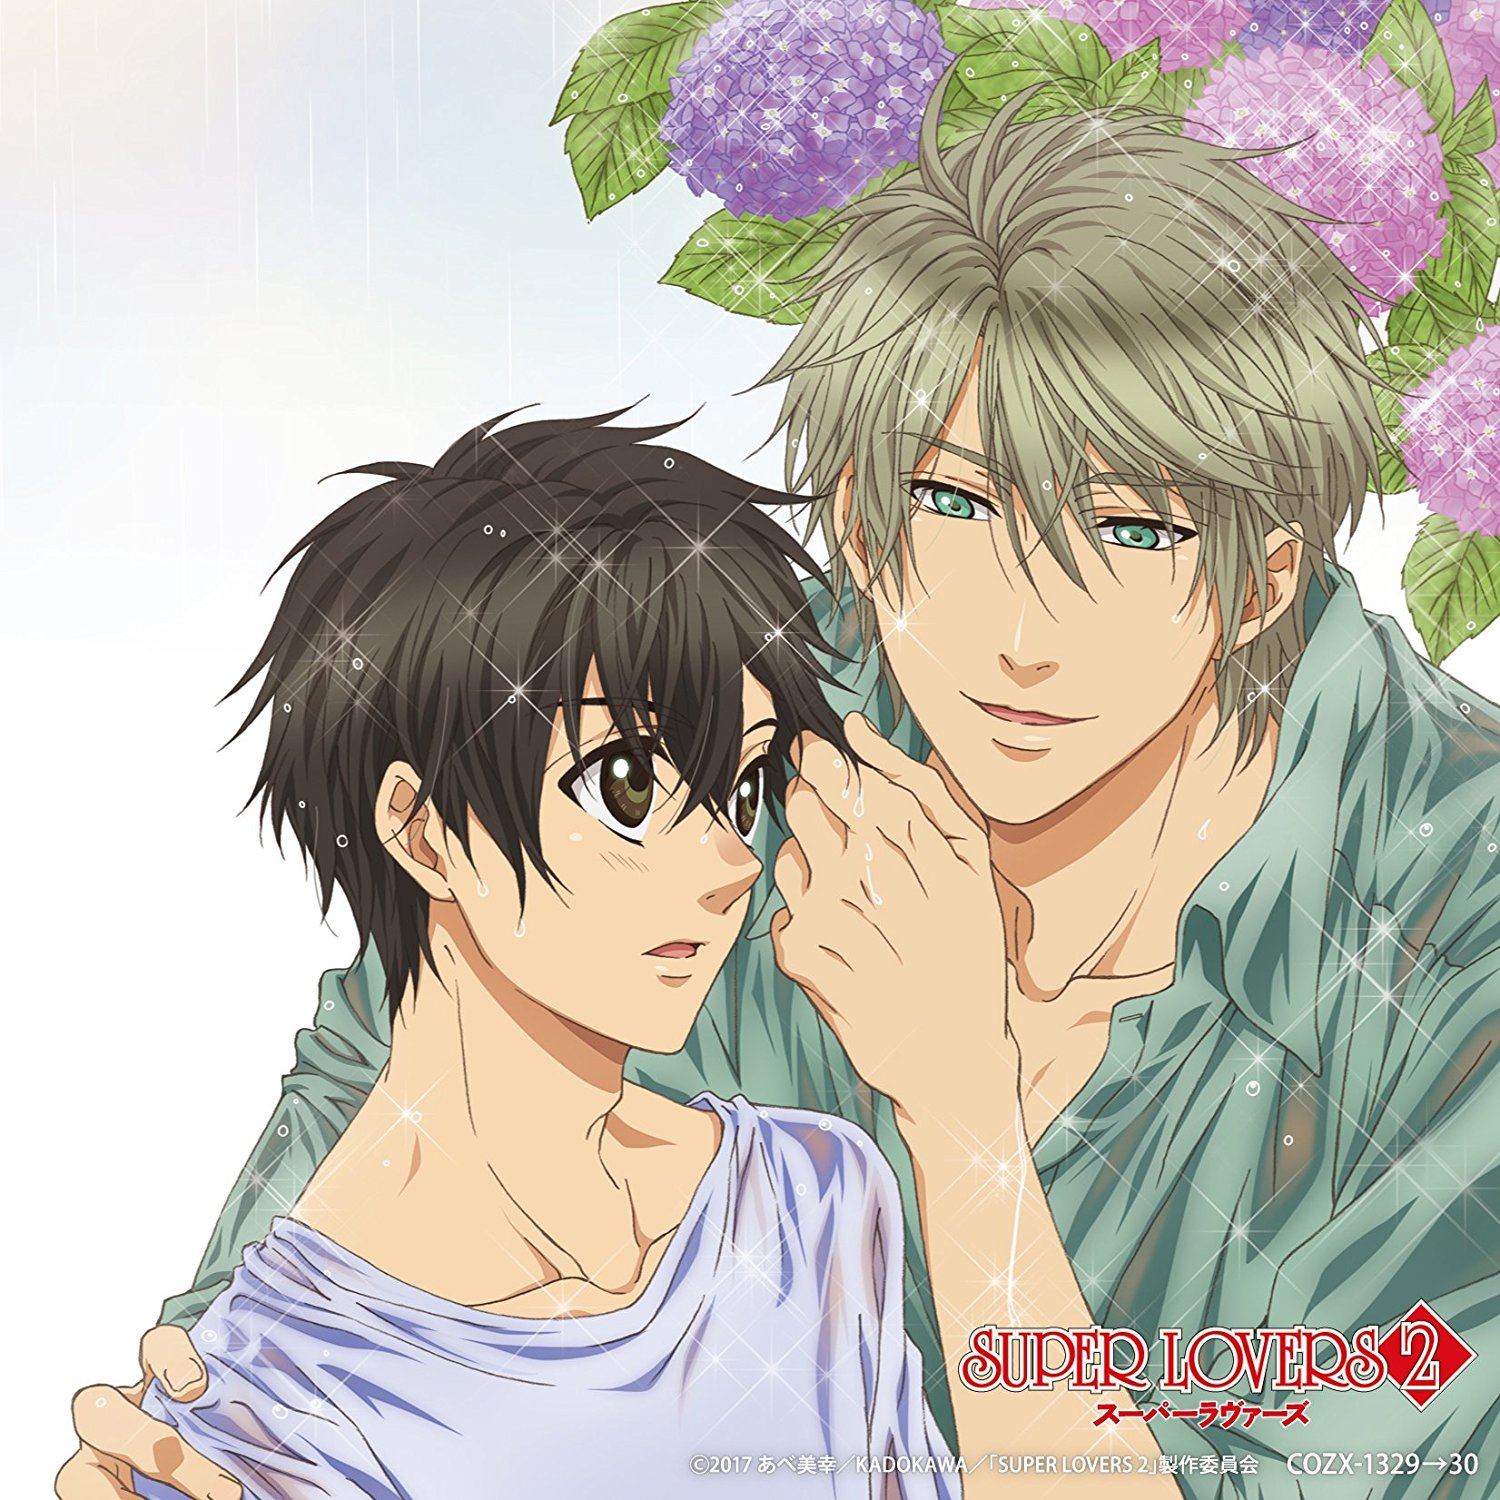 Super Lovers 2 Character Song Album - My Precious CD+DVD.